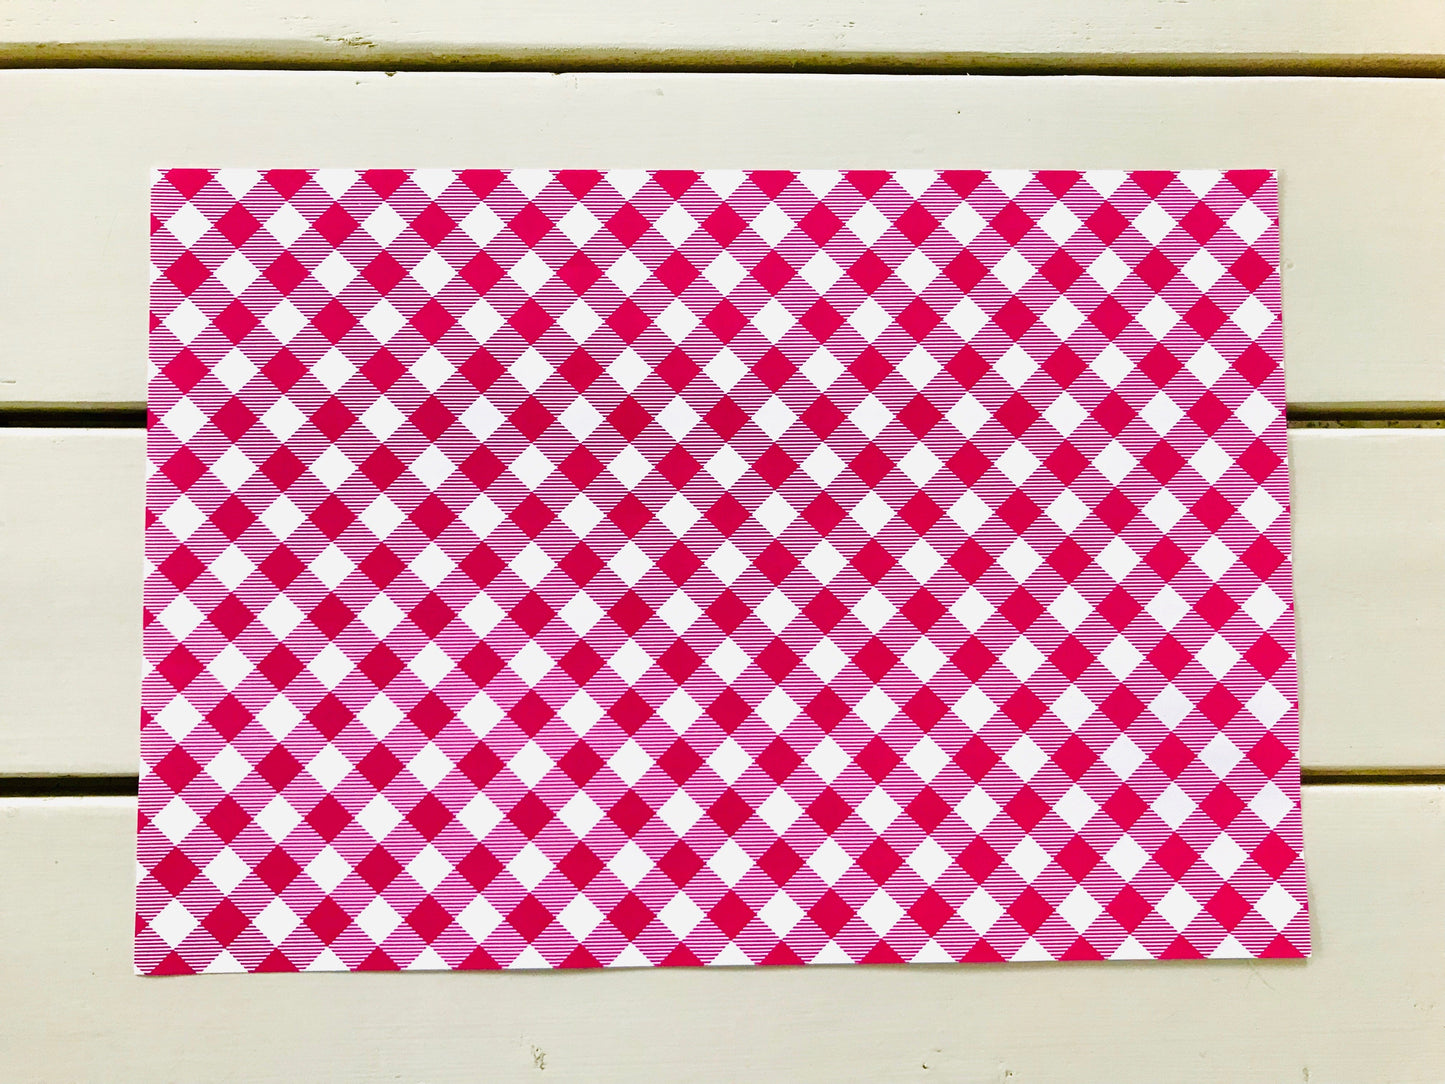 Hot Pink Gingham Placemats